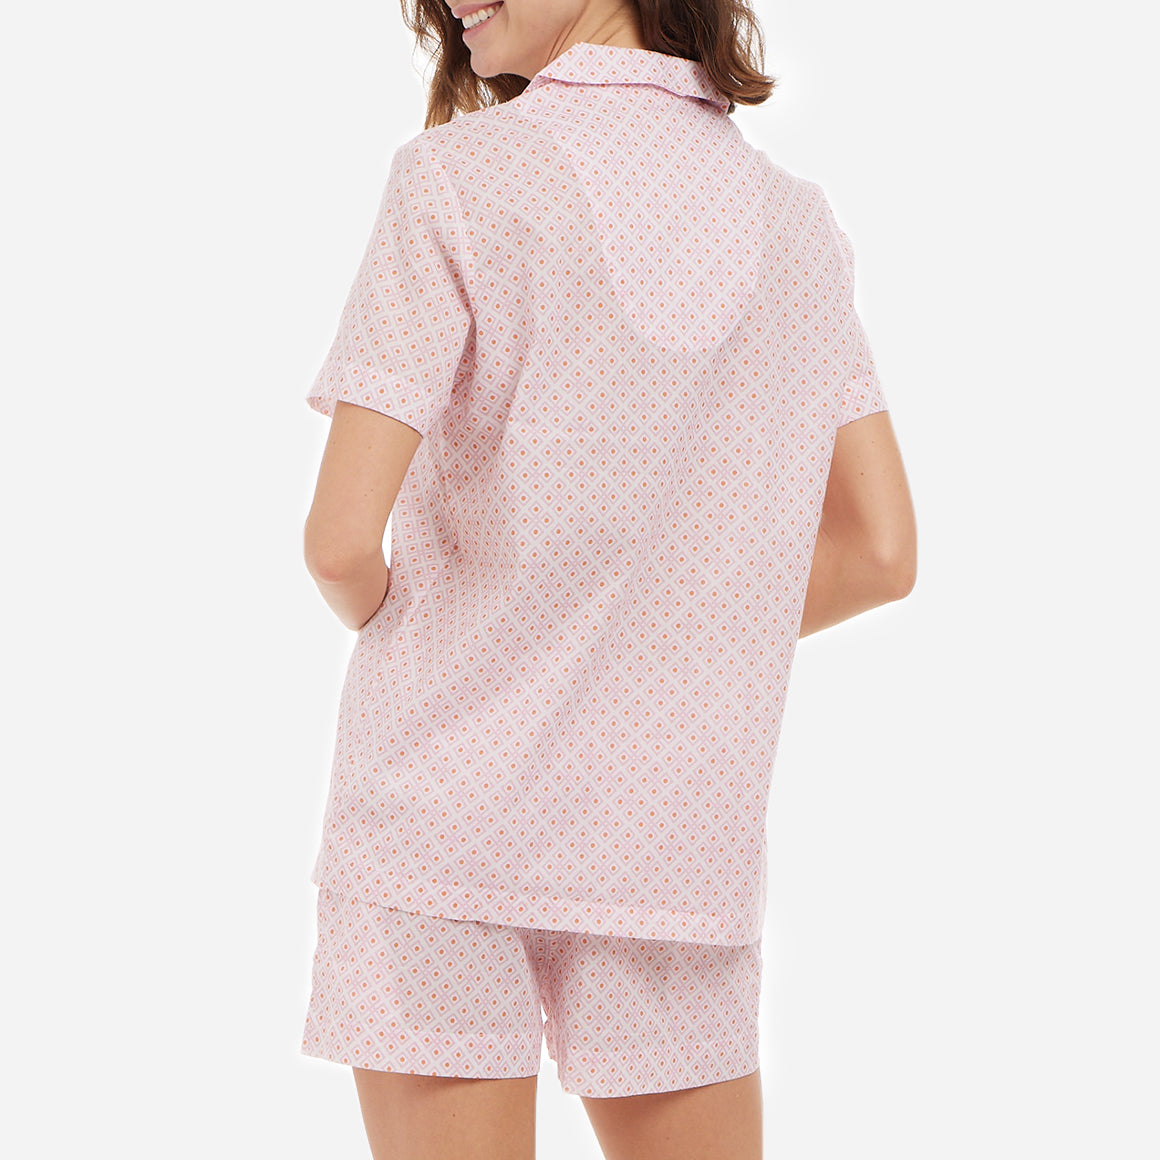 The short sleeves of this pajama set offer a breezy feel, perfect for warm summer nights or year-round comfort, while the elastic waistband on the shorts provides a custom fit. The relaxed cut allows for ease of movement, ensuring you stay comfortable and unrestricted as you unwind or go about your morning routine.